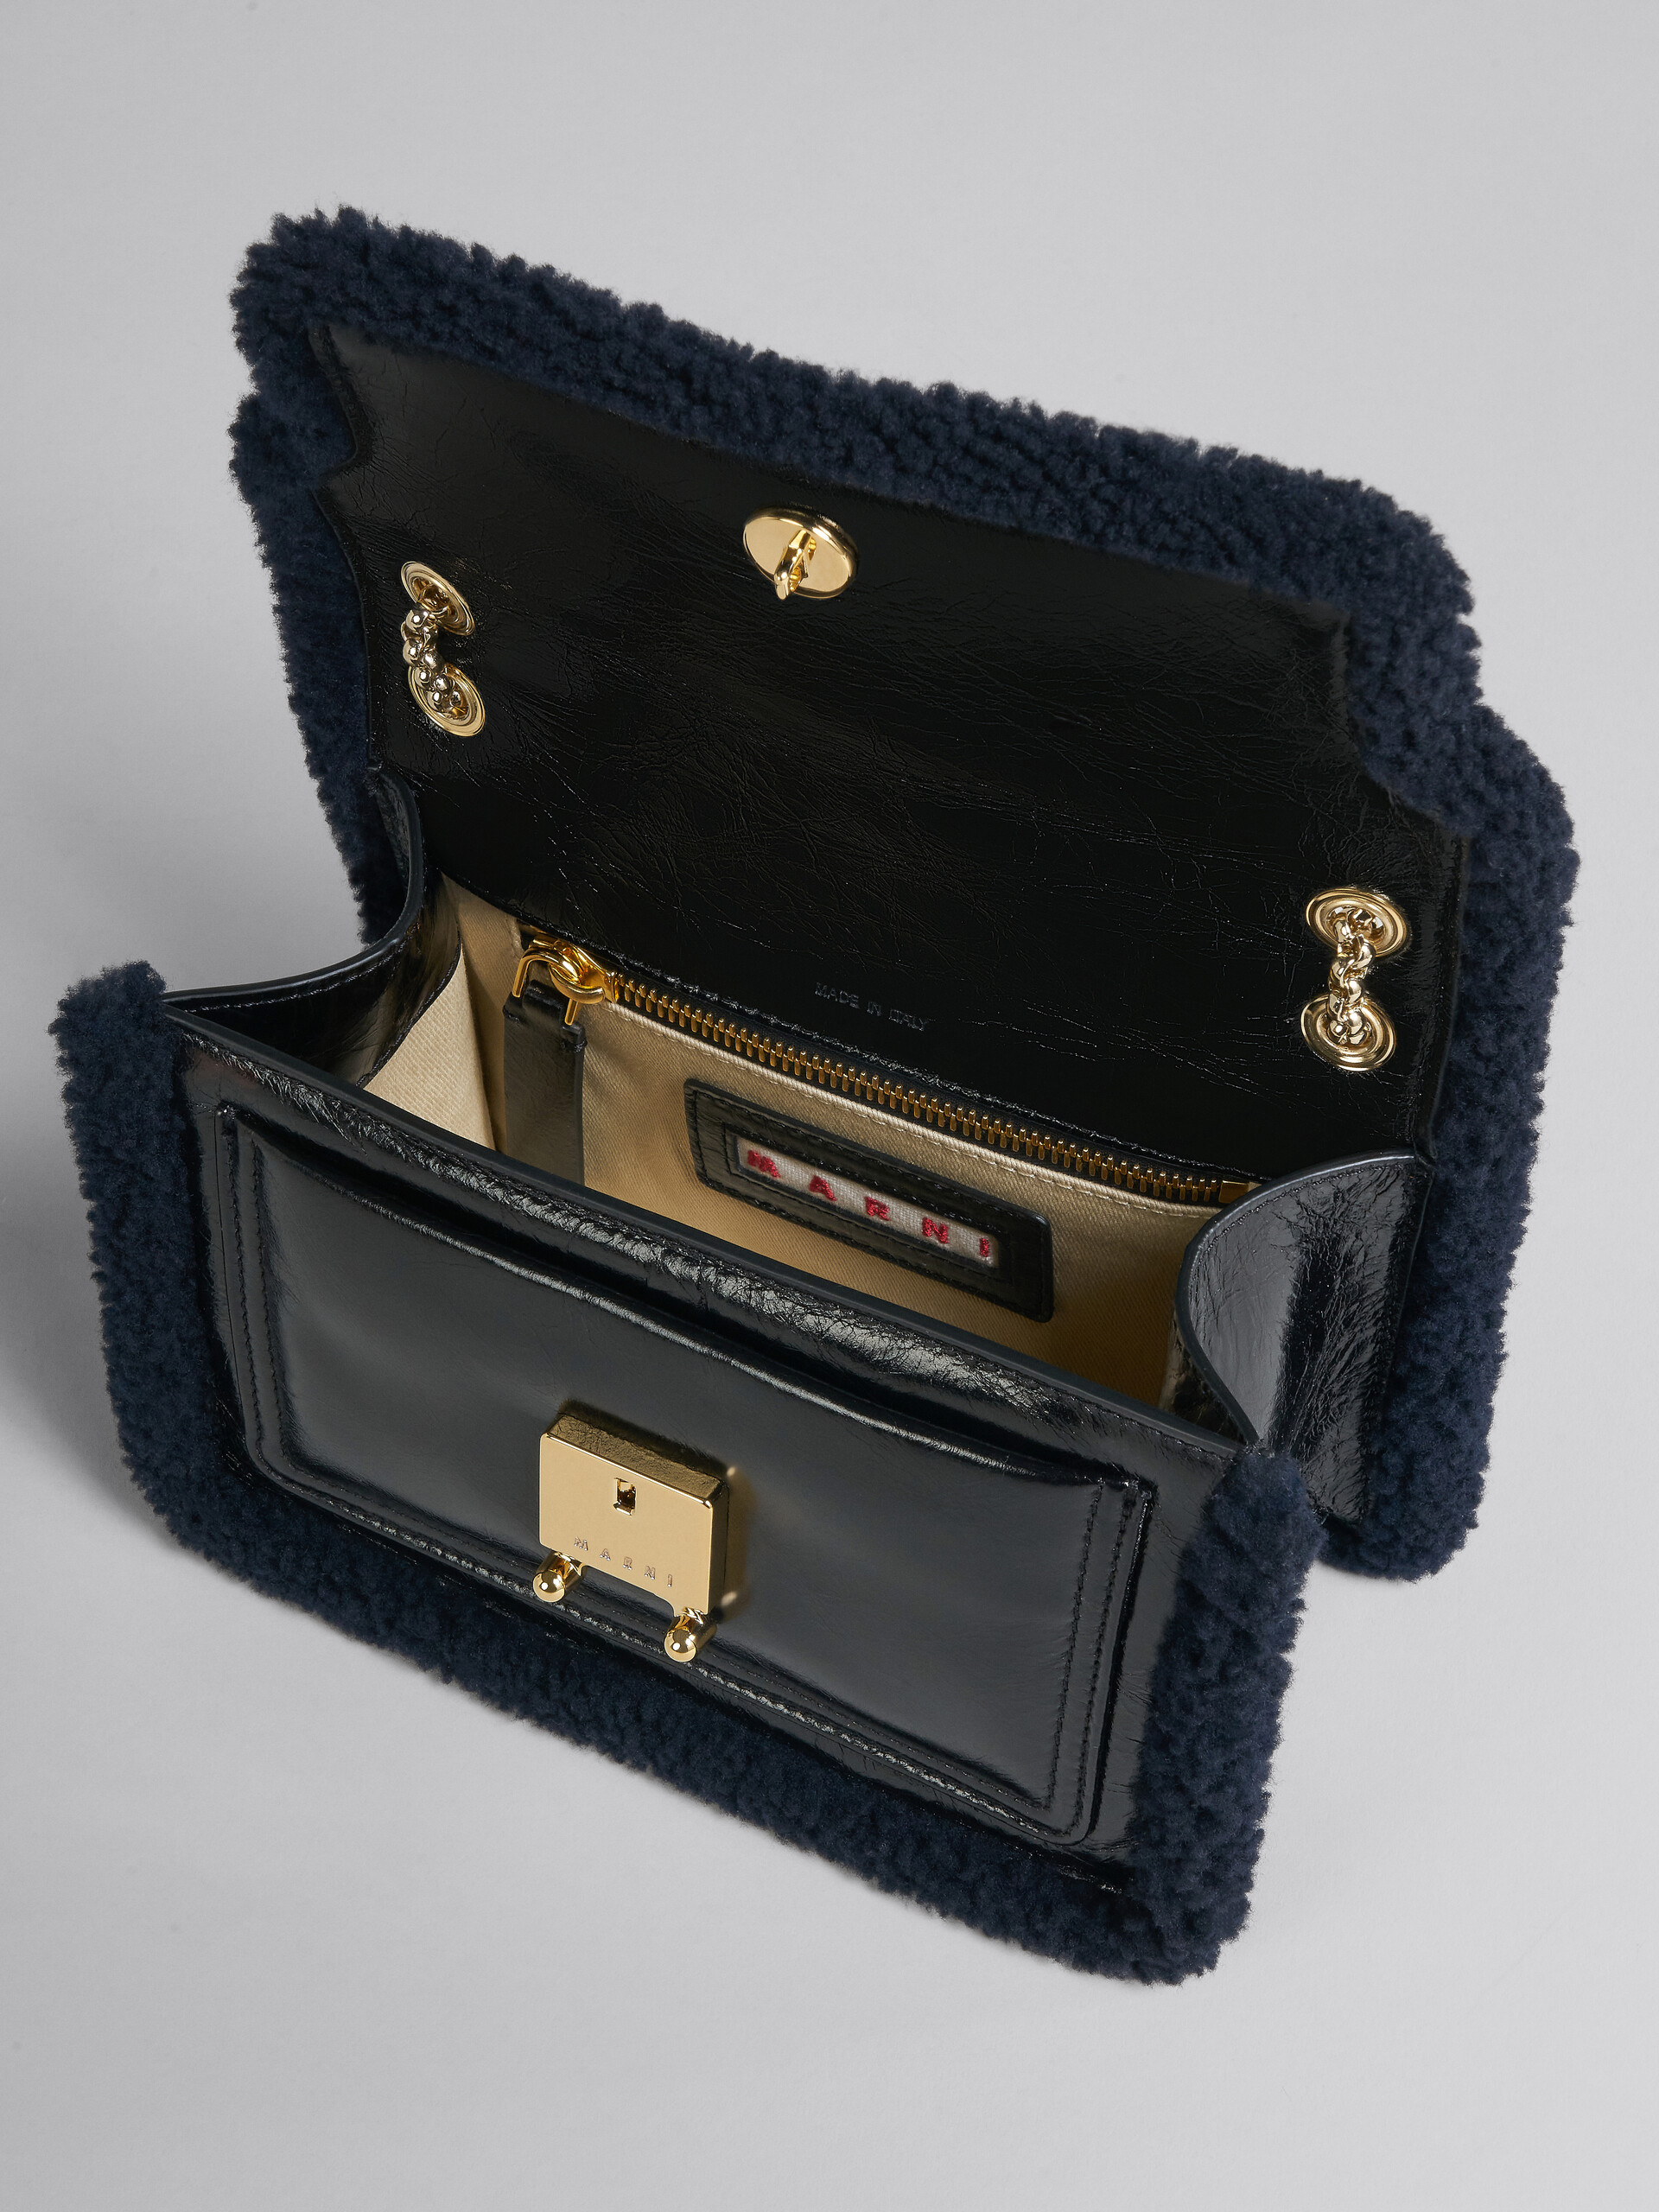 Trunk Envelope Chain in black leather and merinos - Shoulder Bags - Image 4